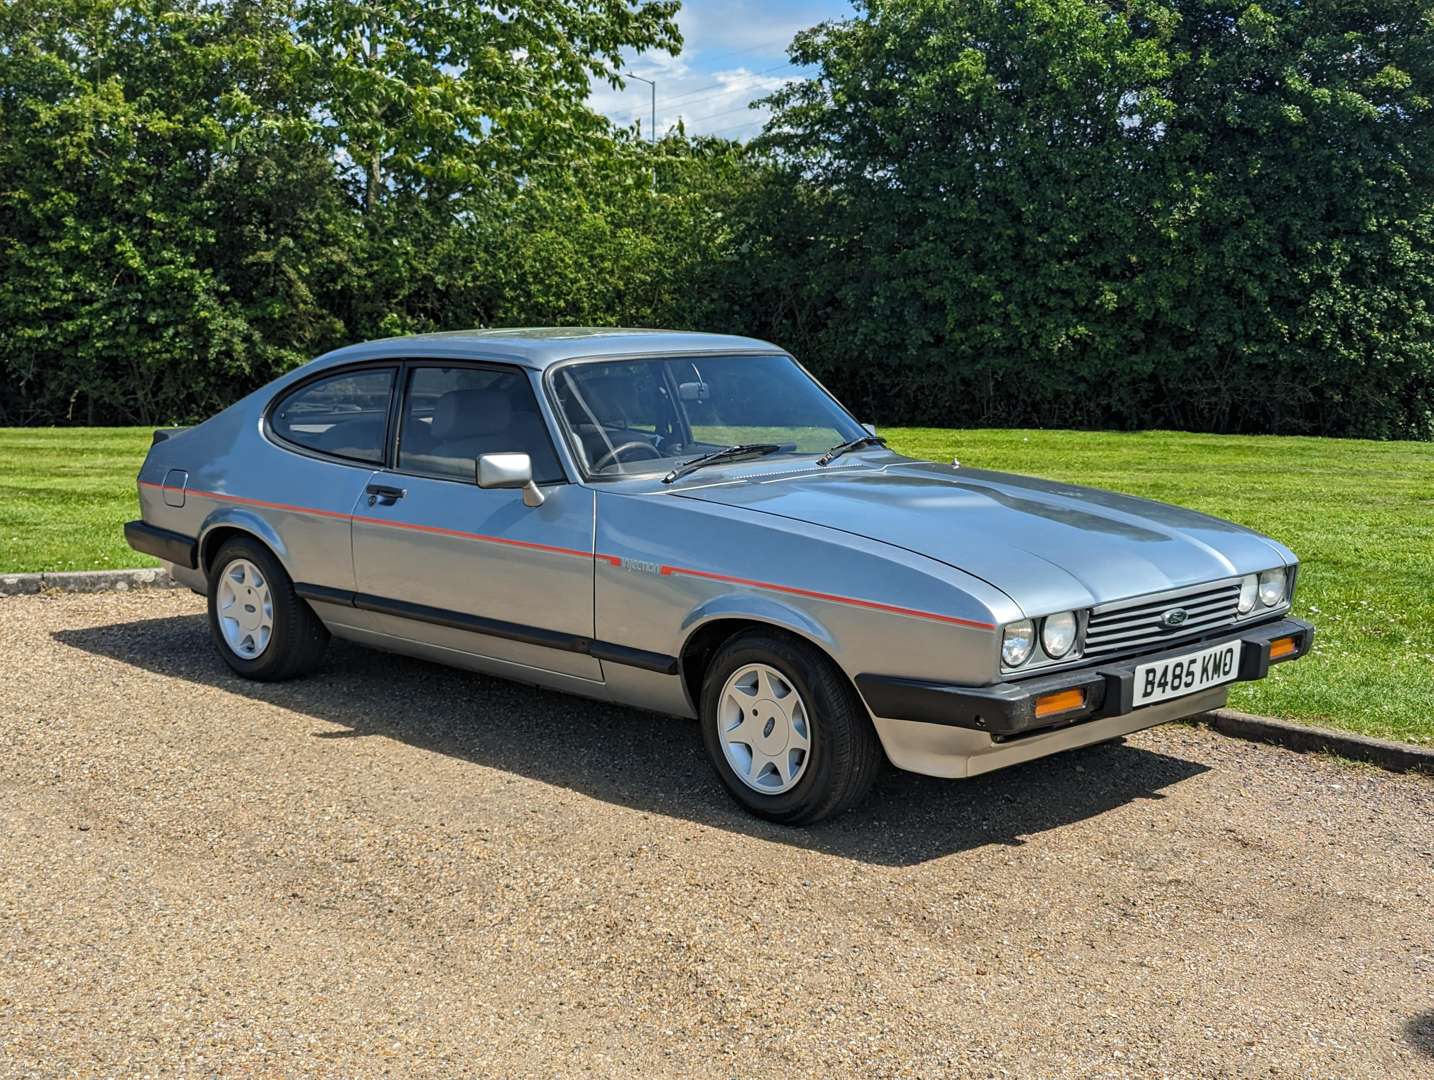 <p>1985 FORD CAPRI 2.8 INJECTION</p>